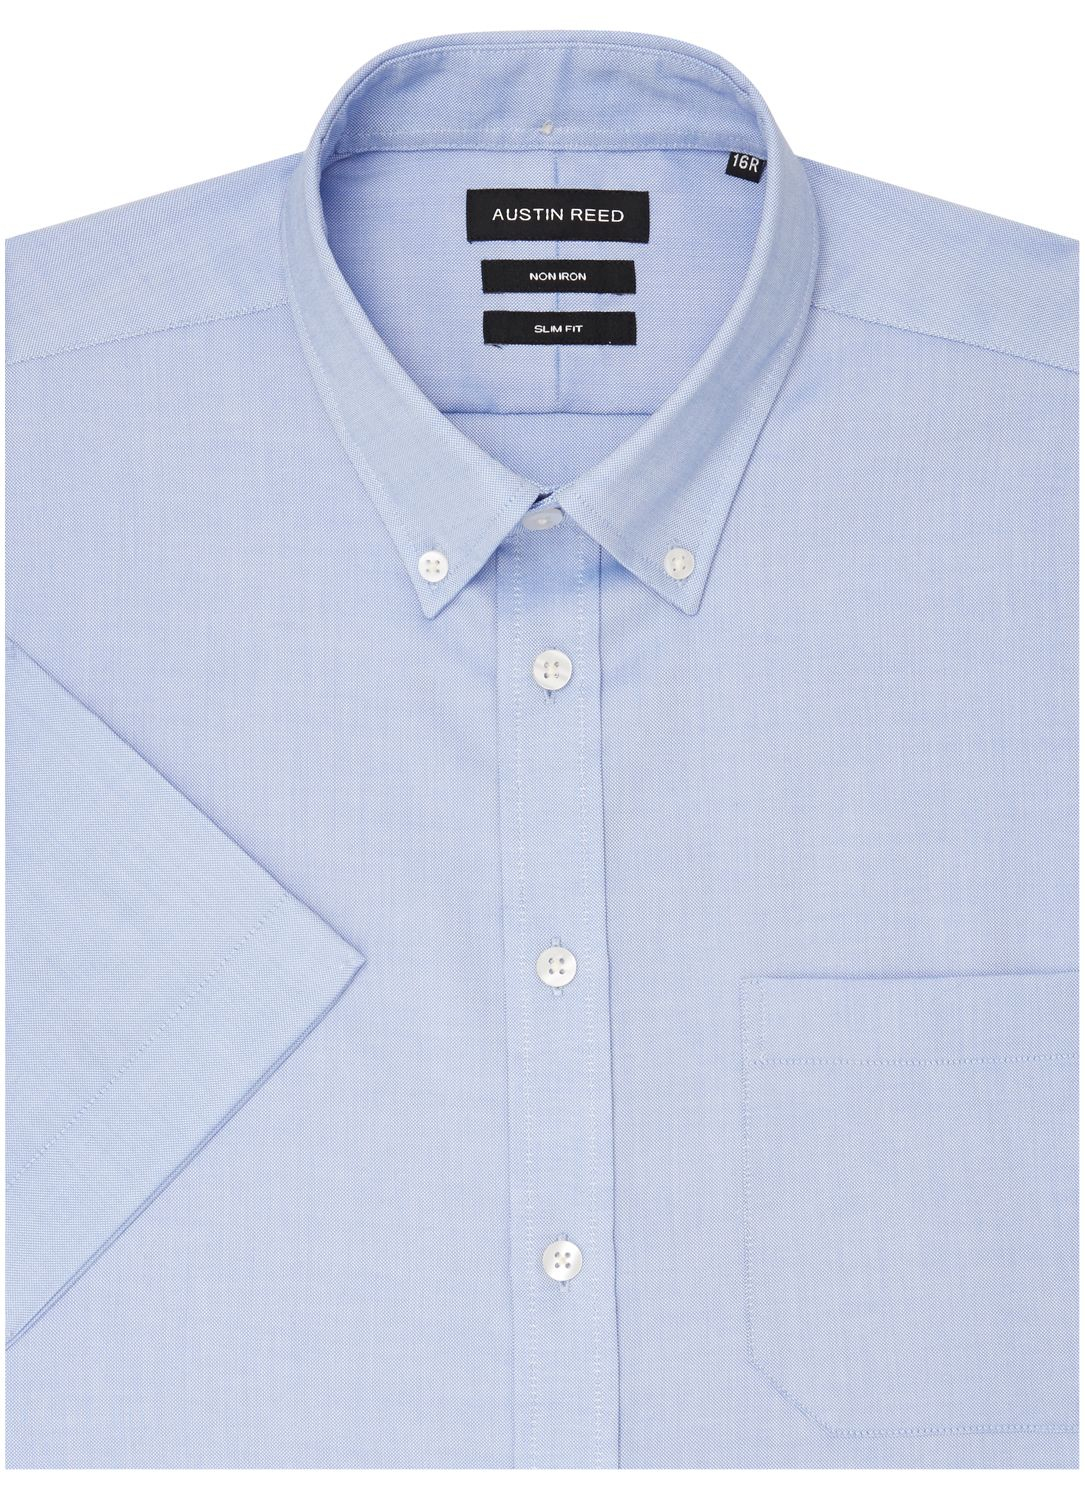 Austin reed Plain Classic Fit Short Sleeve Button Down Shirt in Blue ...